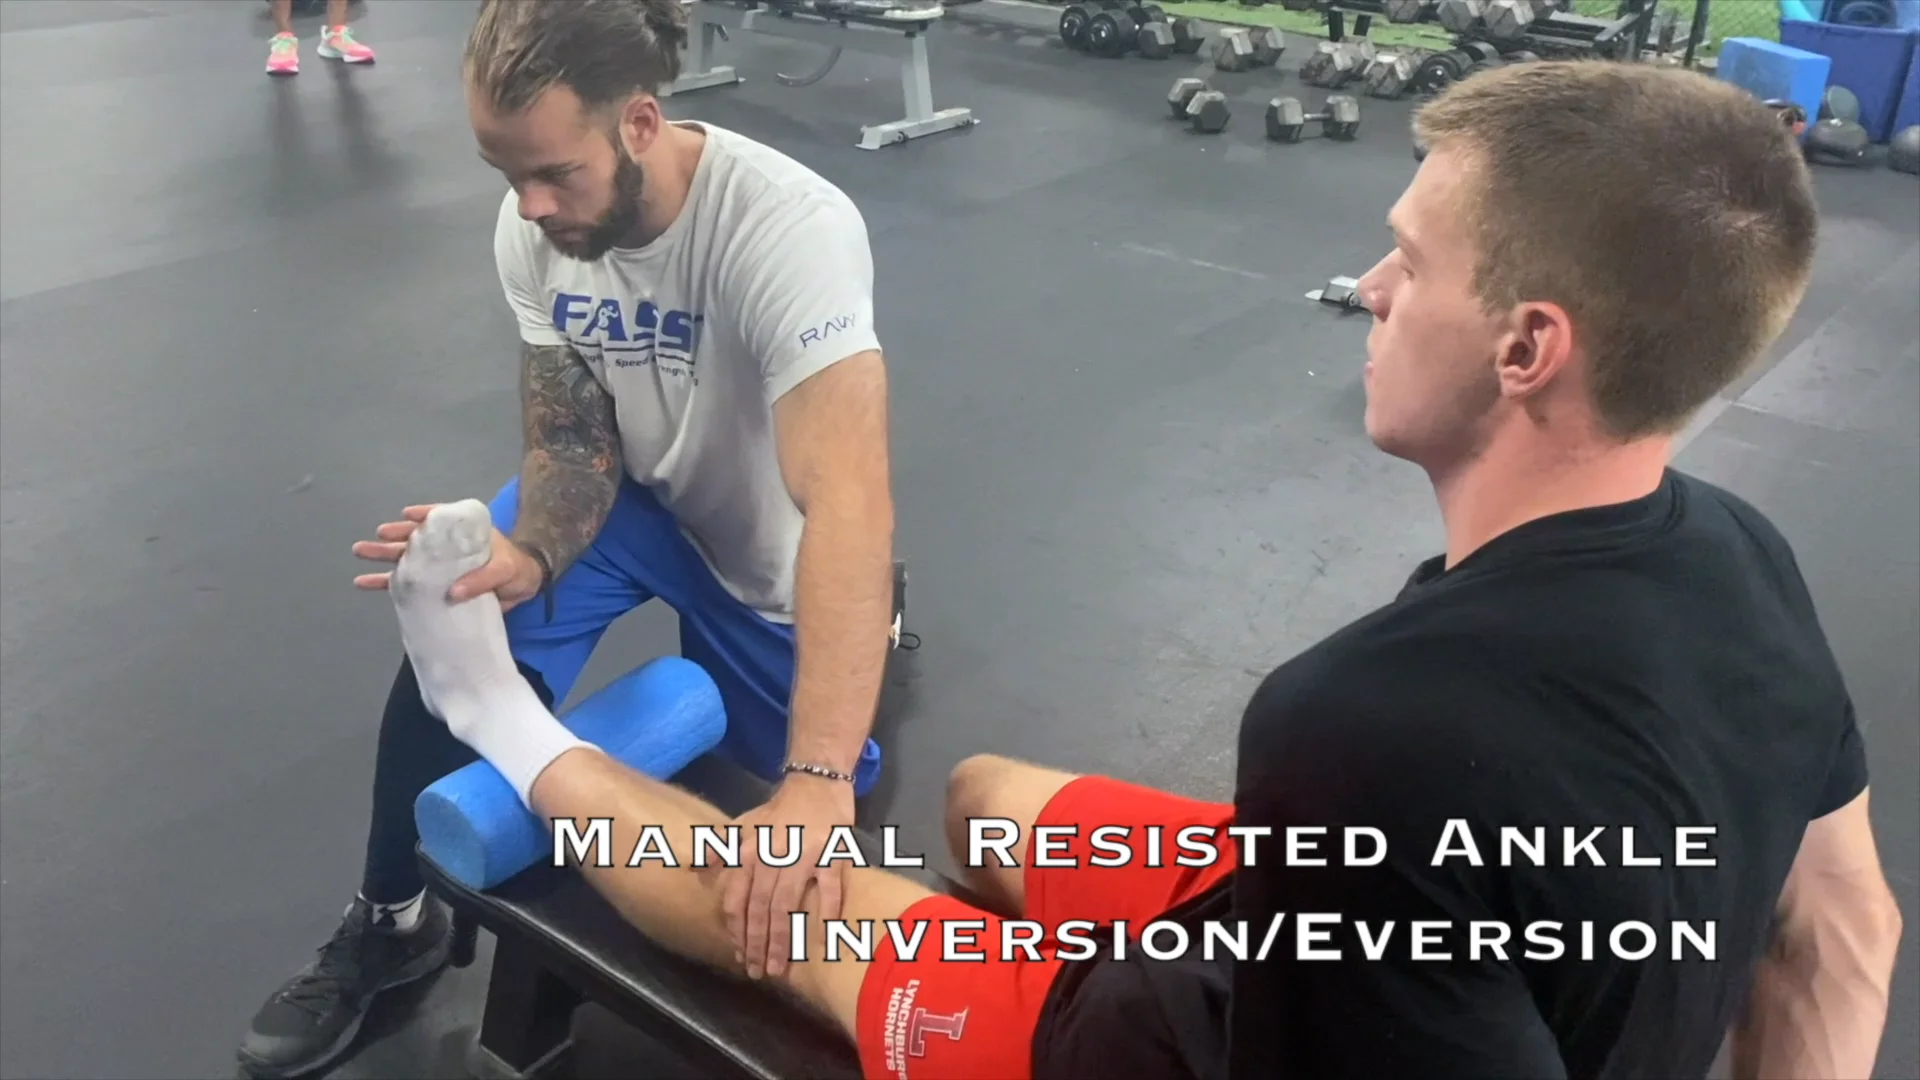 4.) Manual Resisted Ankle Inversion_Eversion.mp4 on Vimeo